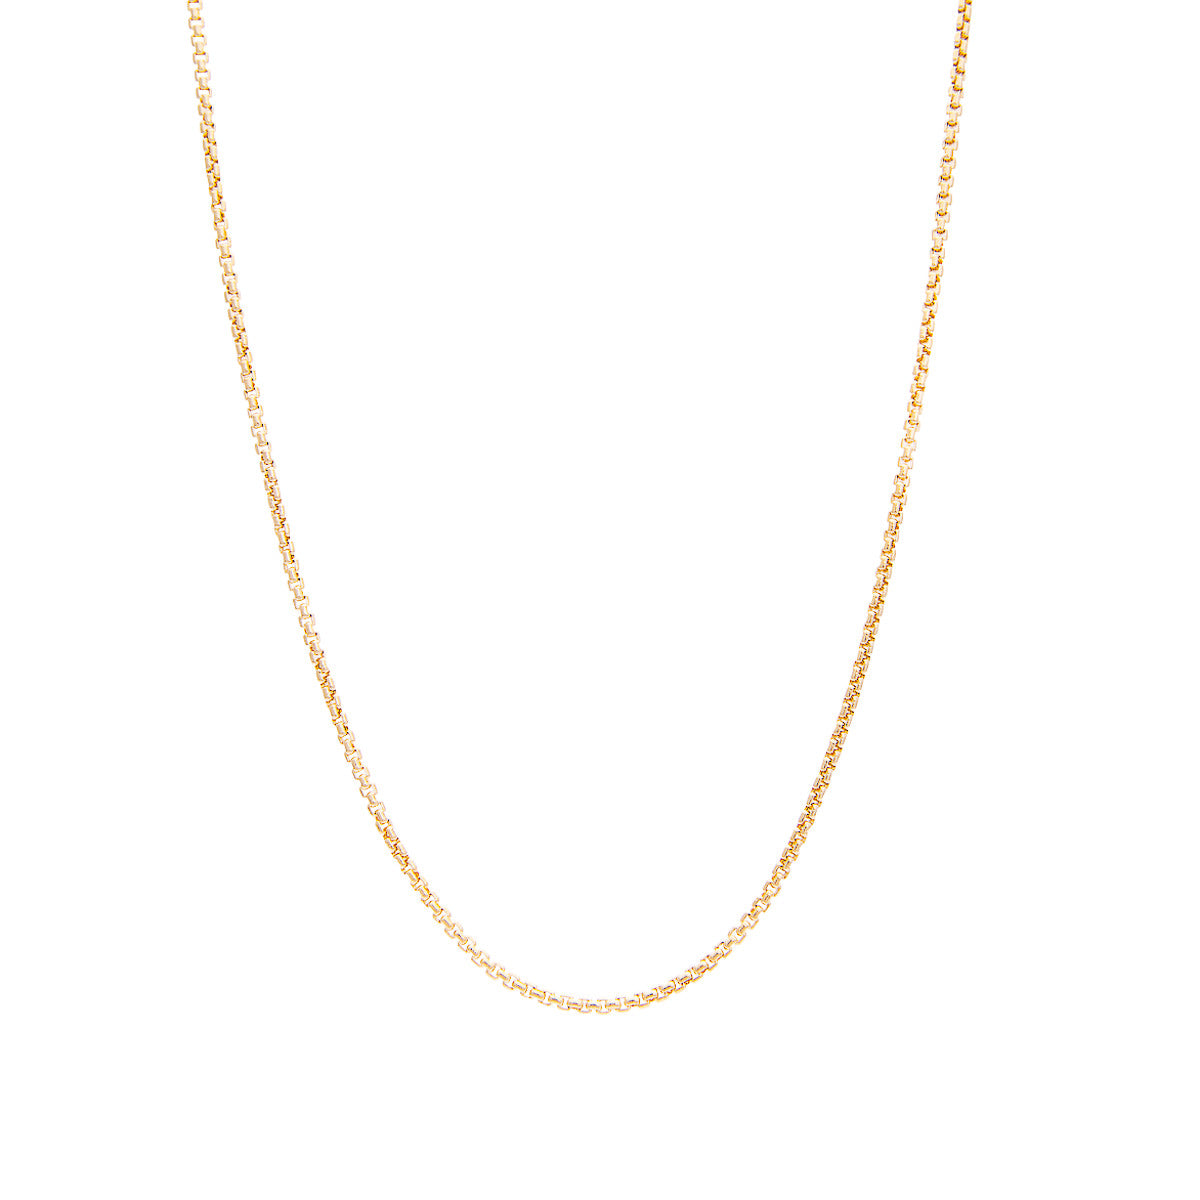 Fink's Jewelers 14K Yellow Gold 1.8mm Round Hollow Box Chain Necklace